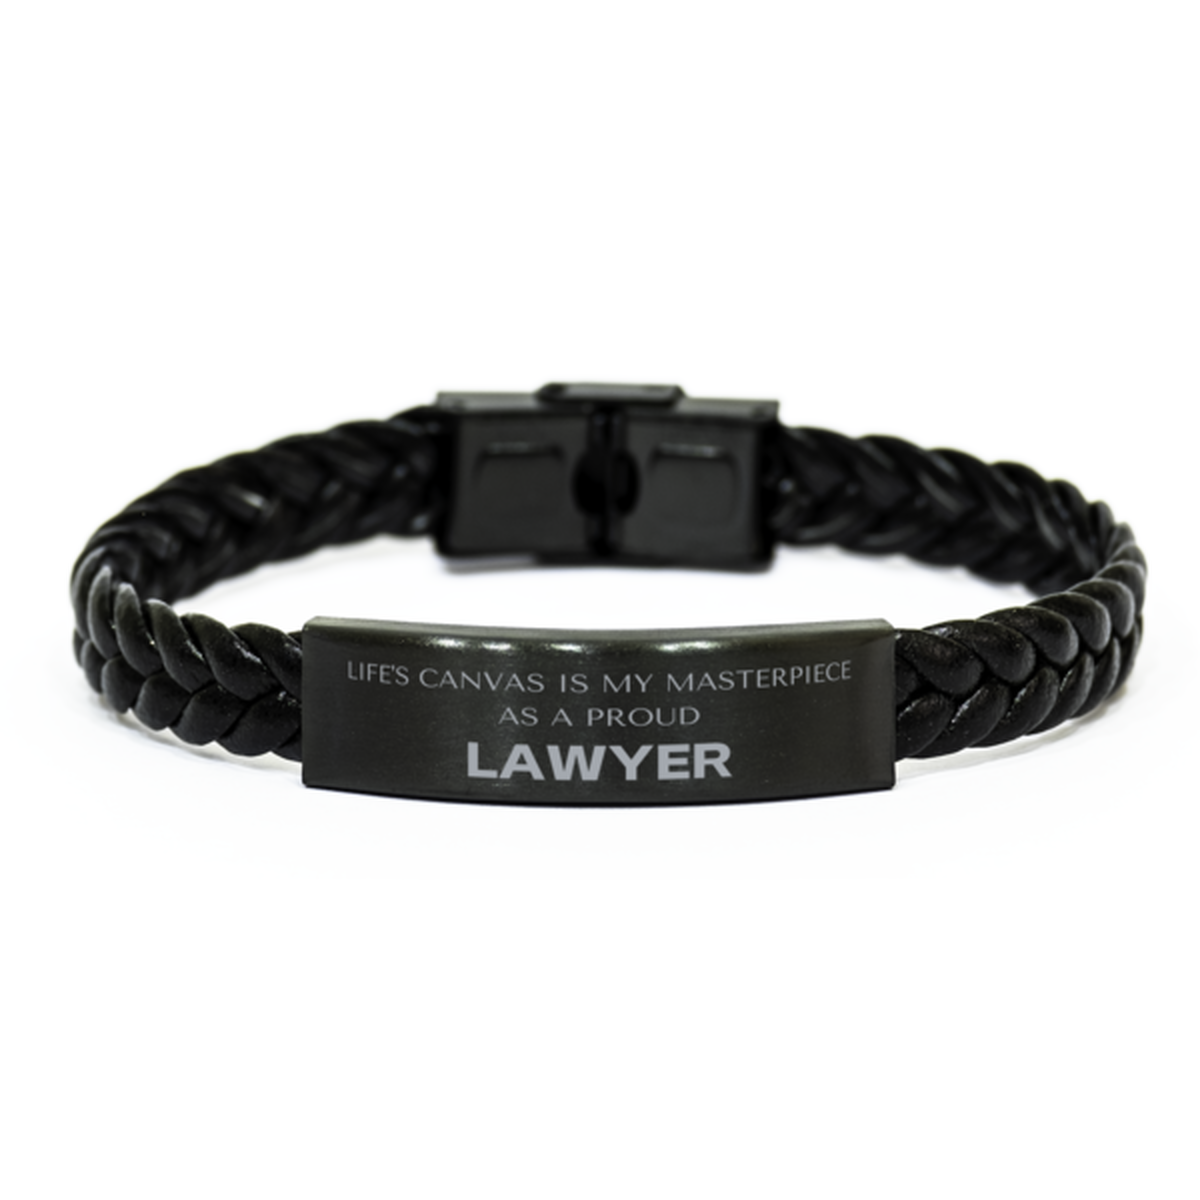 Proud Lawyer Gifts, Life's canvas is my masterpiece, Epic Birthday Christmas Unique Braided Leather Bracelet For Lawyer, Coworkers, Men, Women, Friends